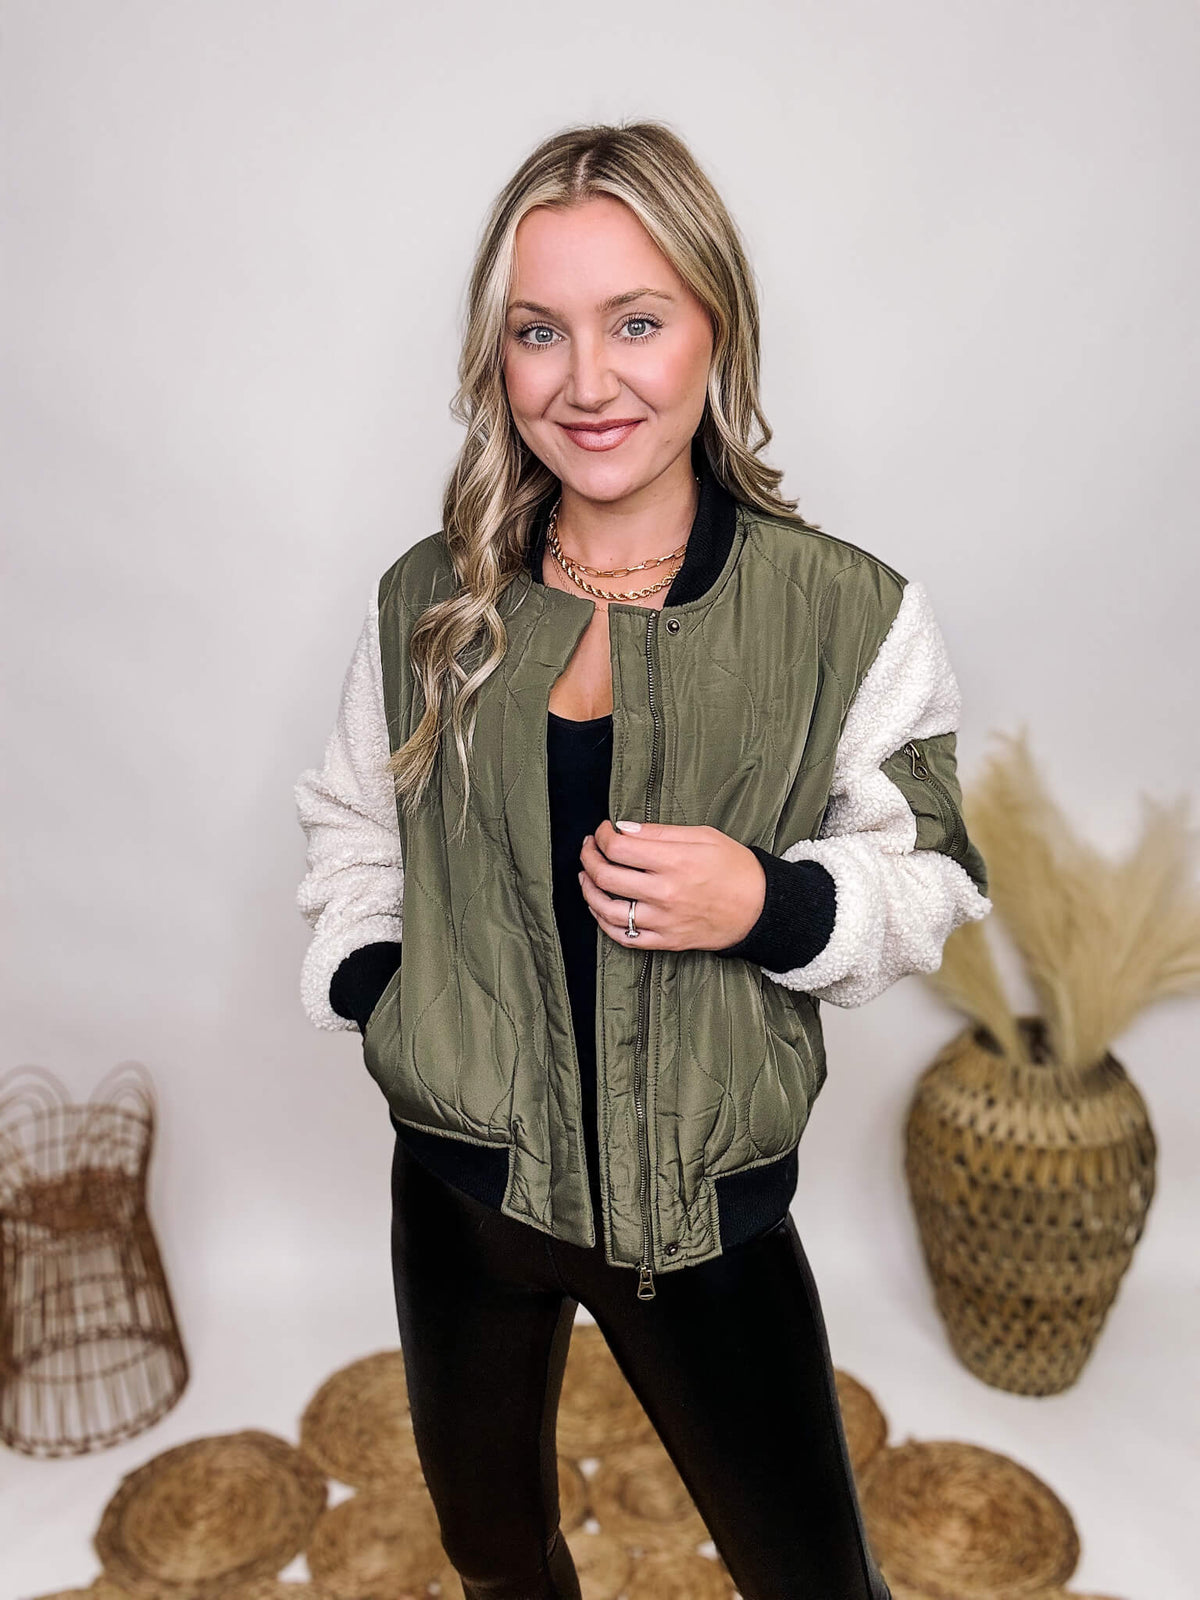 26 International Olive Green Quilted Bomber Jacket Sherpa Sleeves Side Pockets Zip Up with Top and Bottom Button Snaps Medium to Heavy Weight Relaxed Fit 100% Polyester